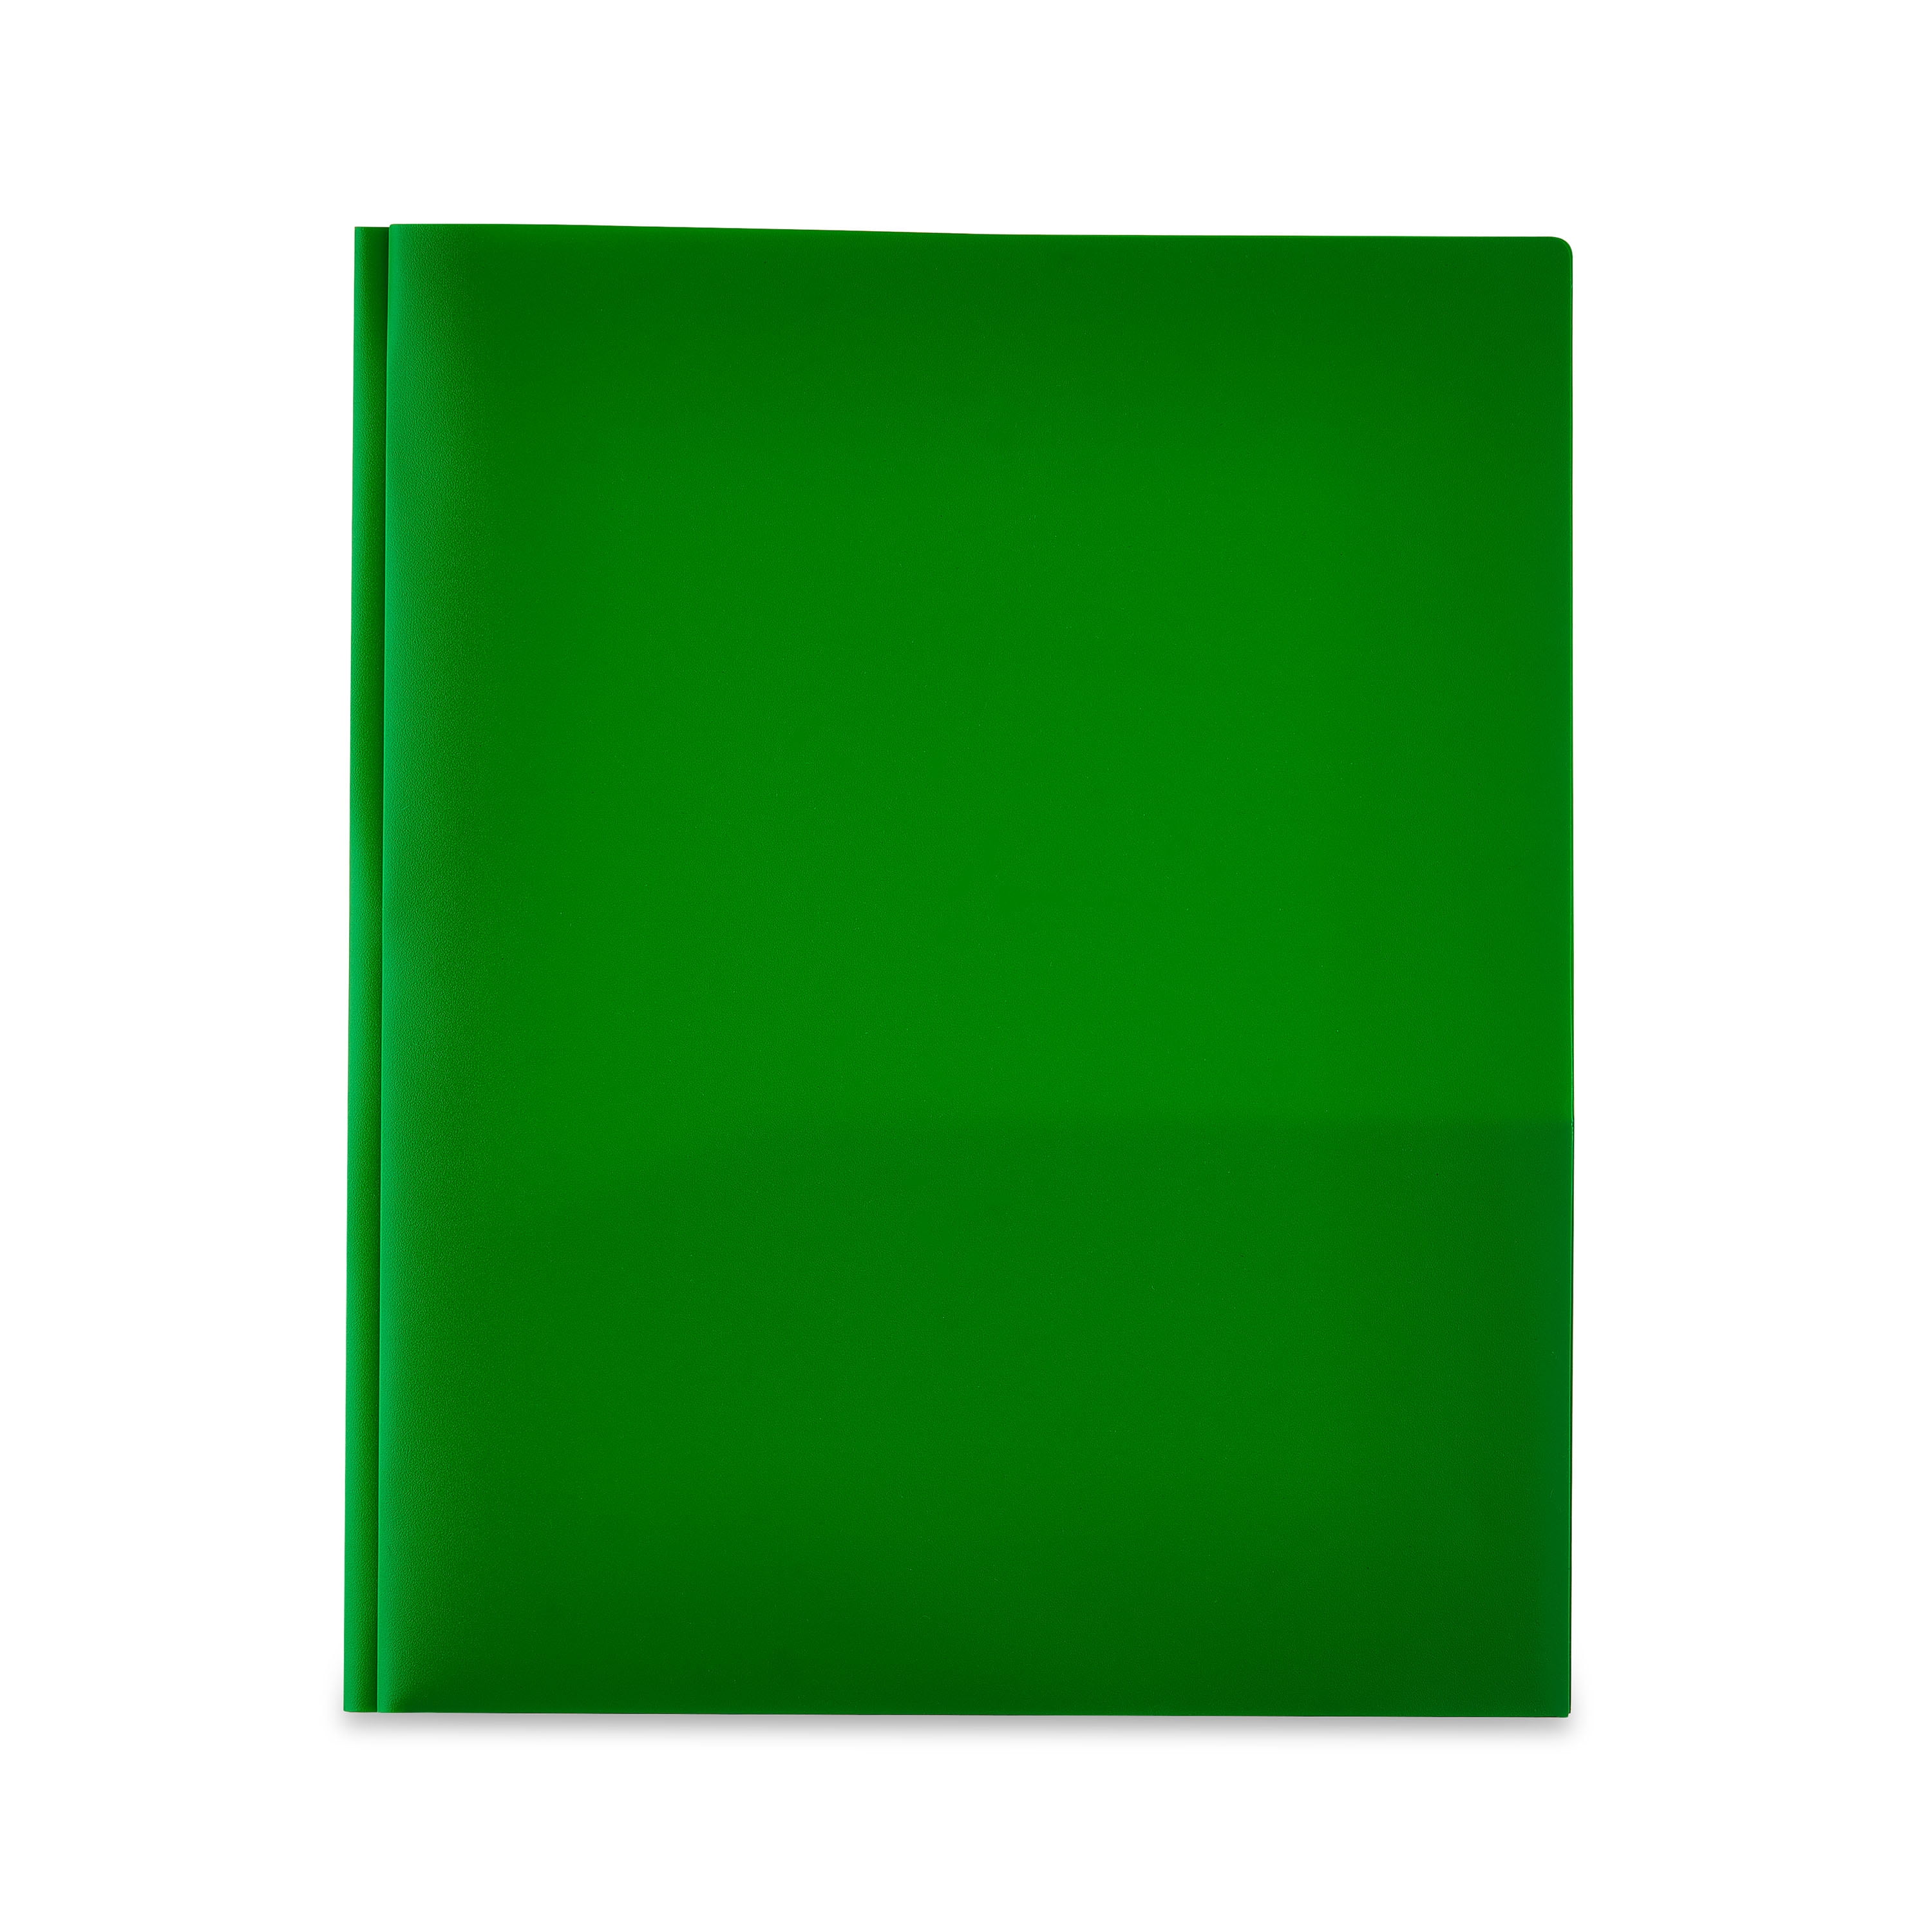 Lime Green Plastic Folder with Clasp -  #382ecligr